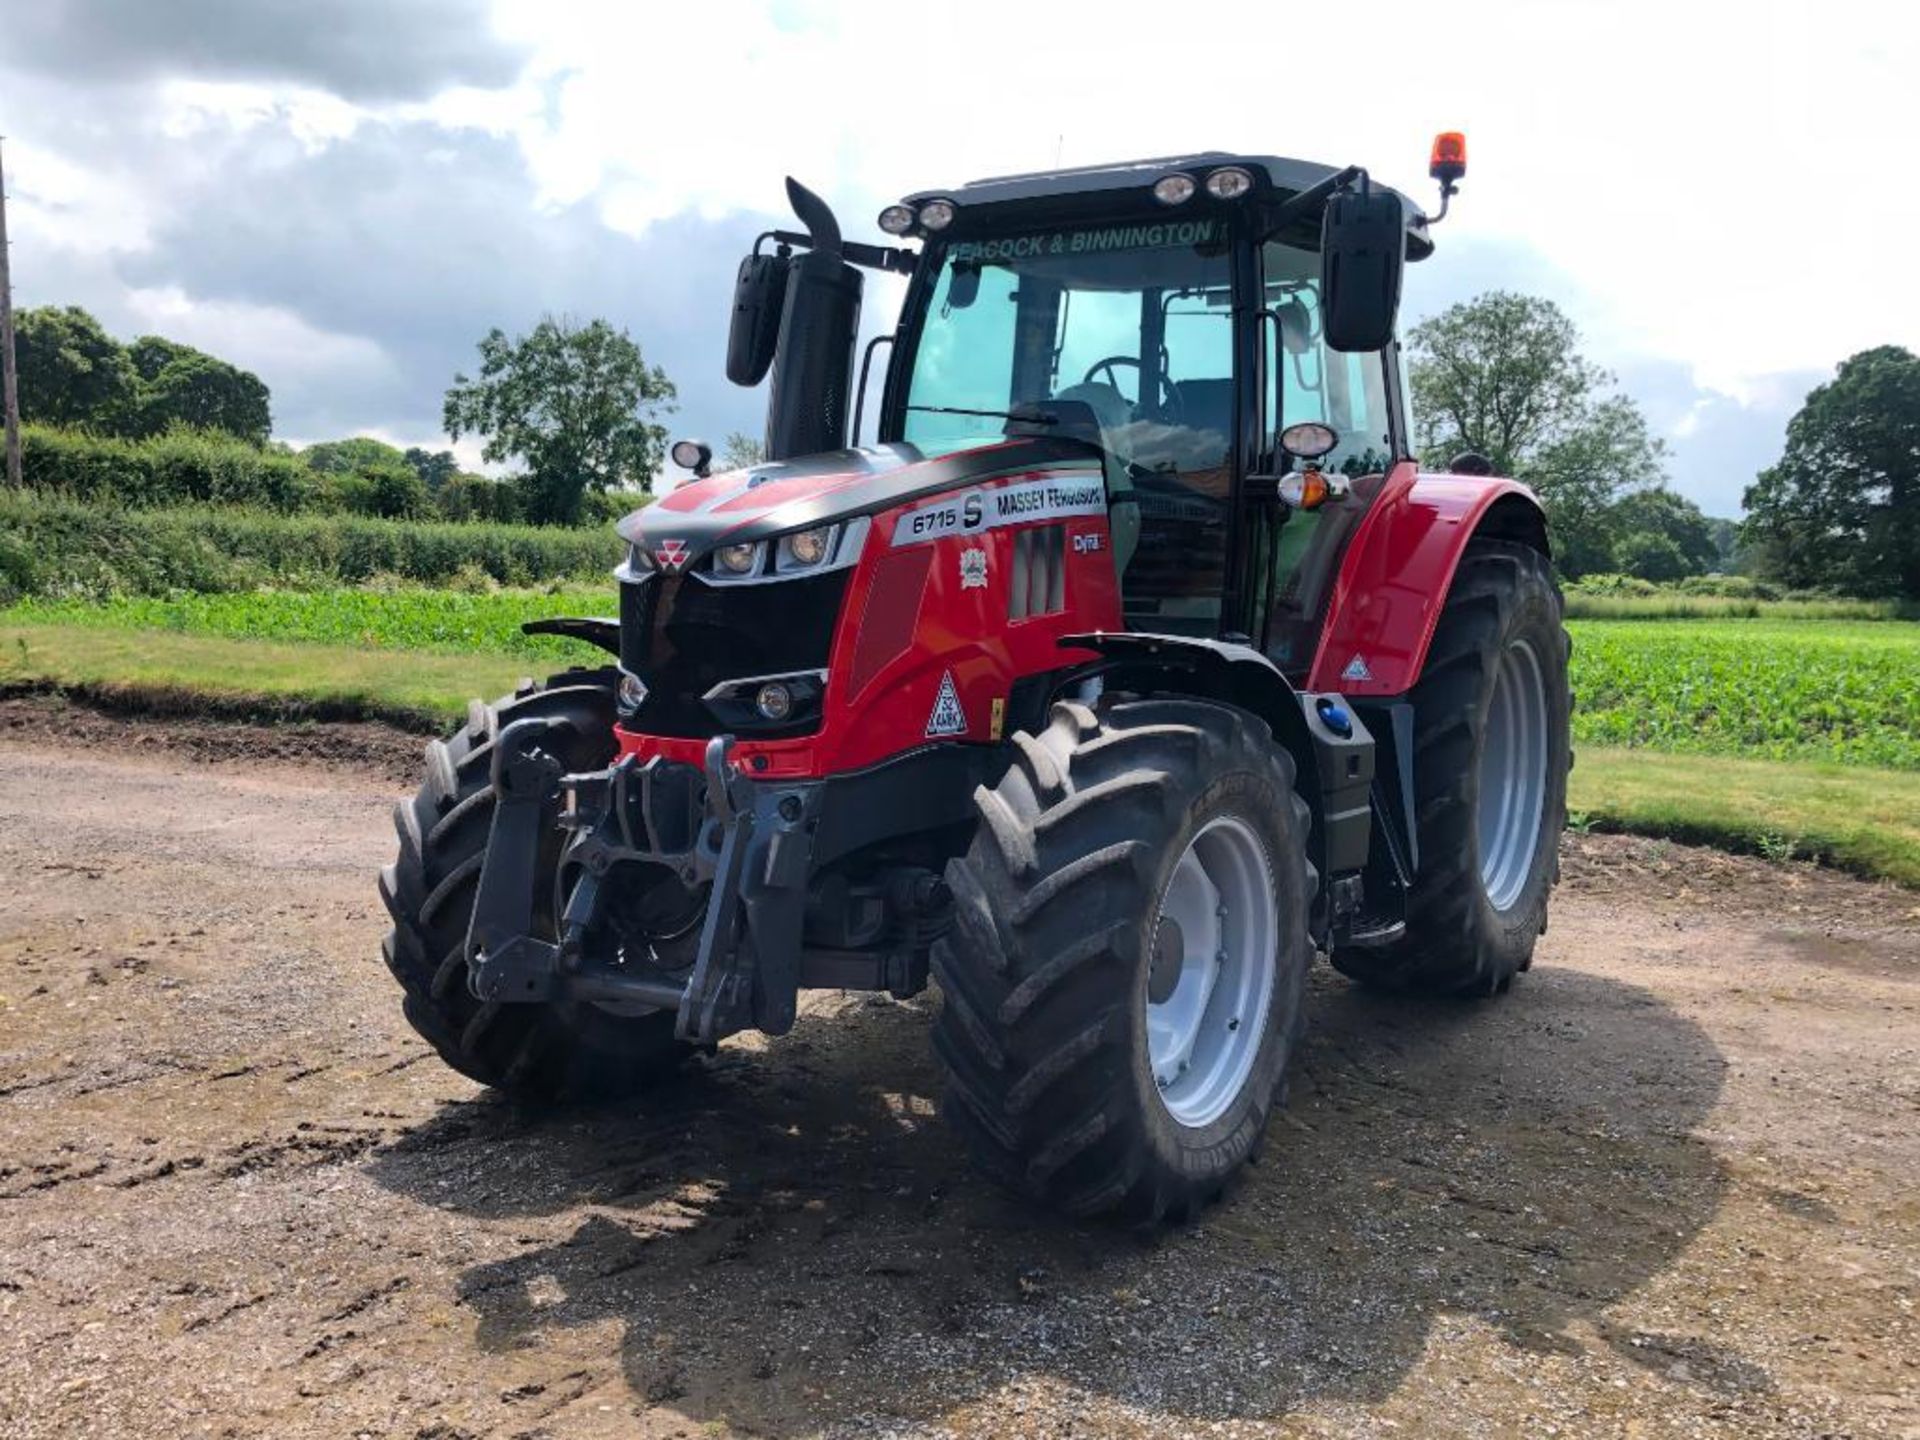 2019 Massey Ferguson 6715 S Dyna 6 50kph 4wd tractor c/w 3 manual spools, front linkage, air brakes, - Image 2 of 41